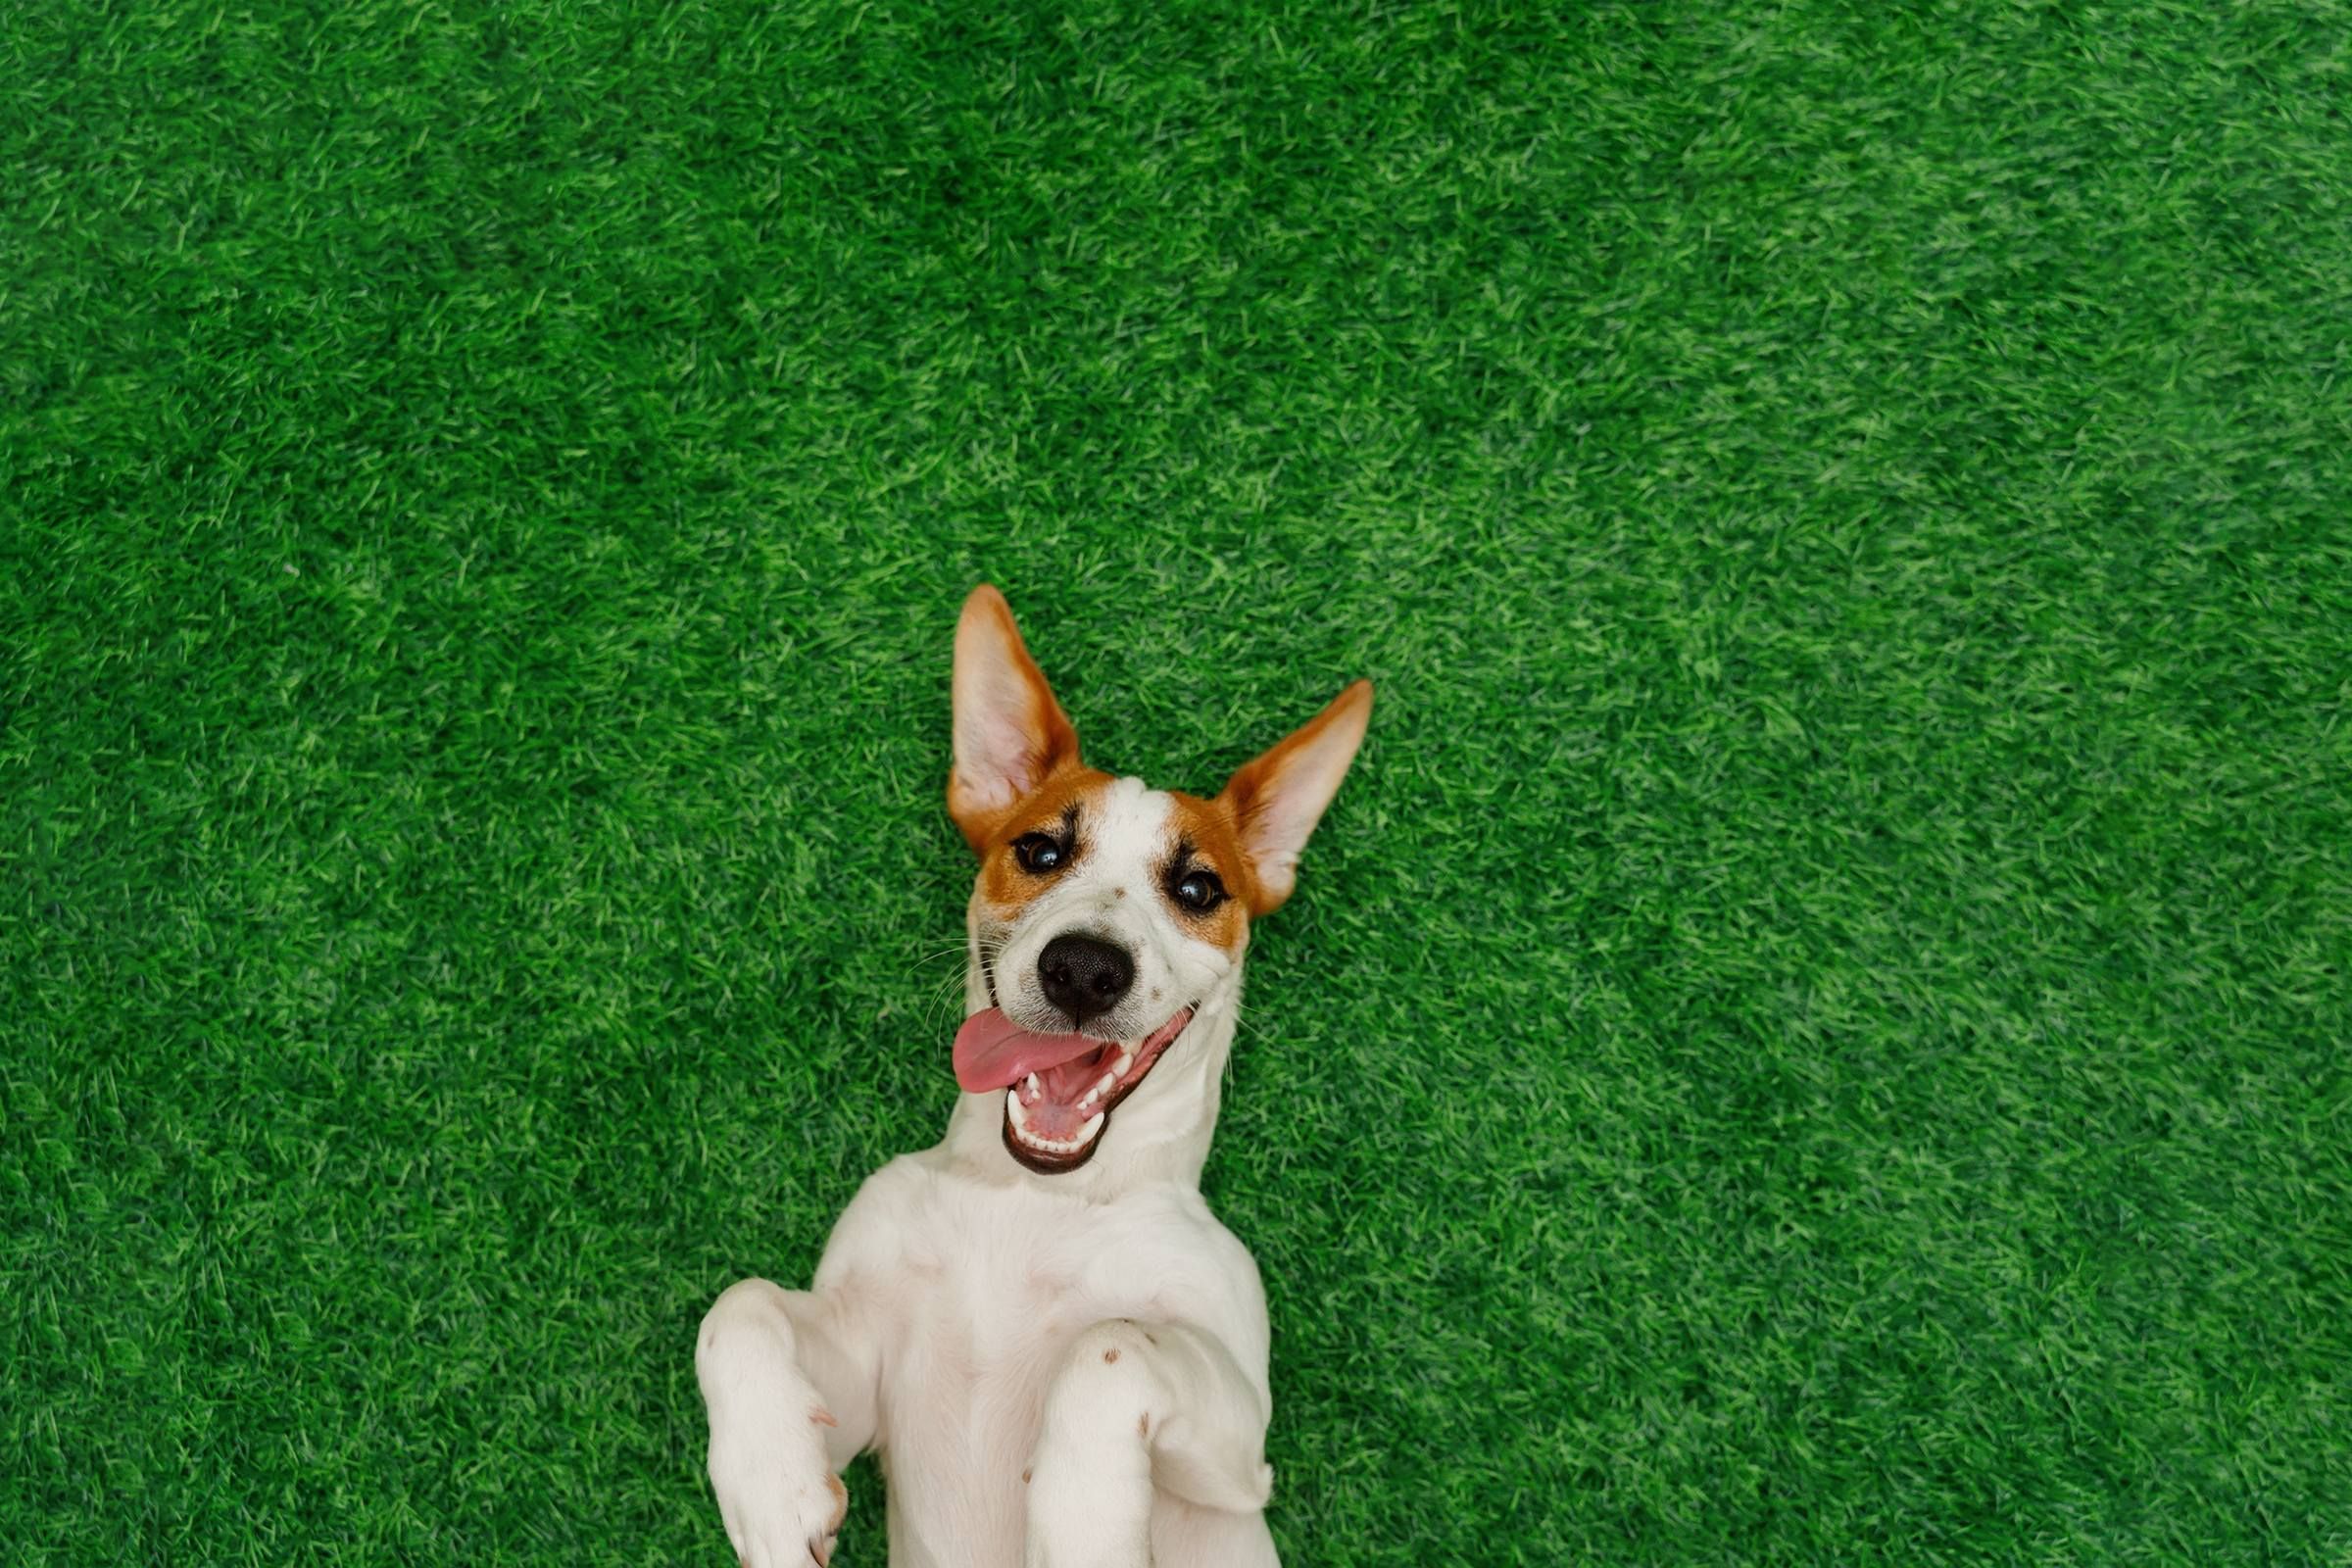 Smiling jack russel terrier dog, lying on green grass.